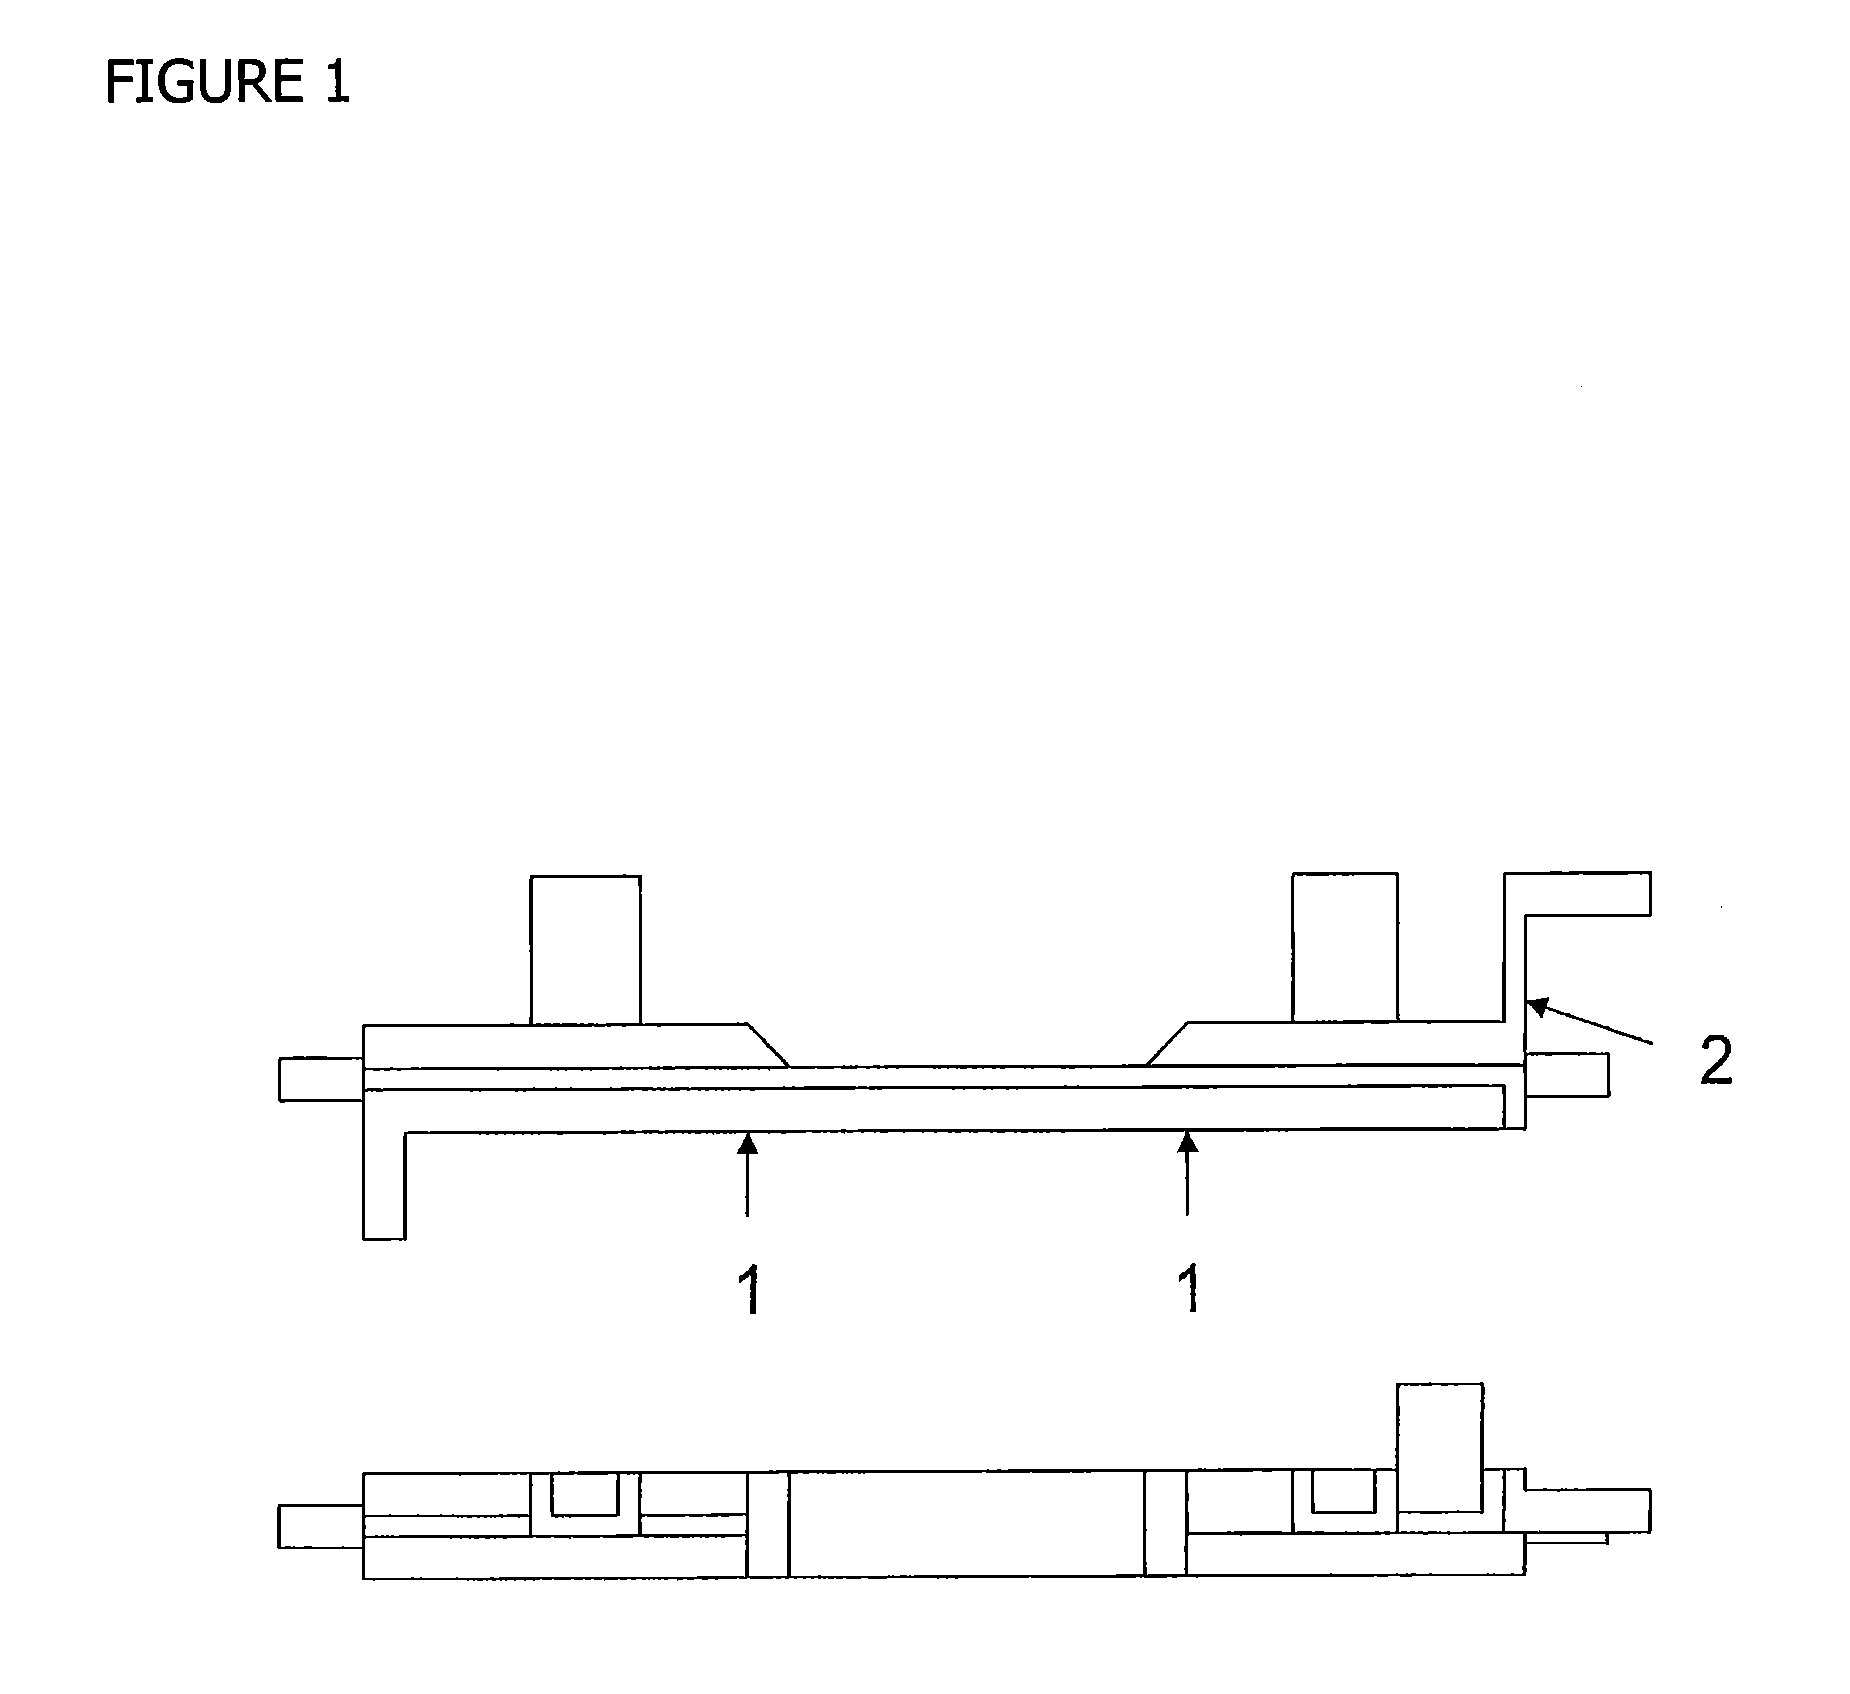 Process for producing metallic or ceramic shaped bodies